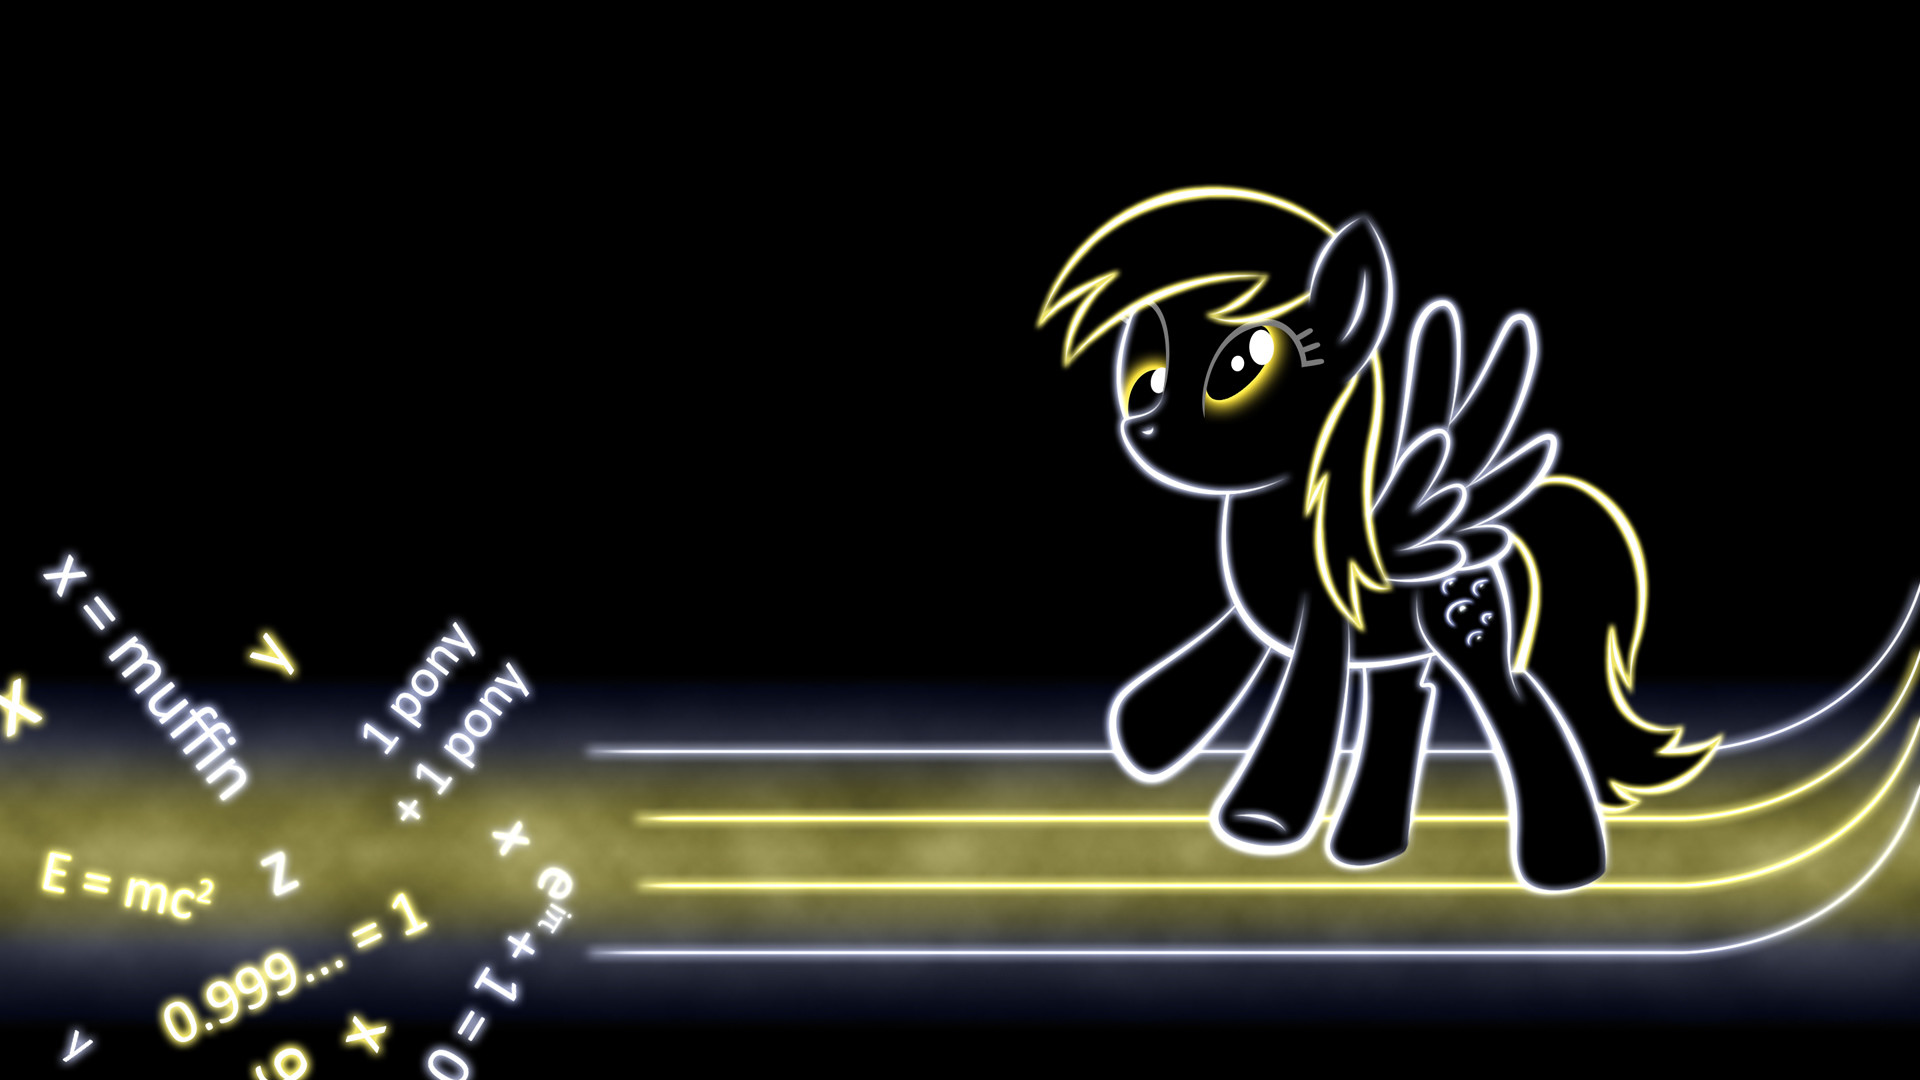 1920x1080 MLP derpy images Derpy Wallpaper HD wallpaper and background photos